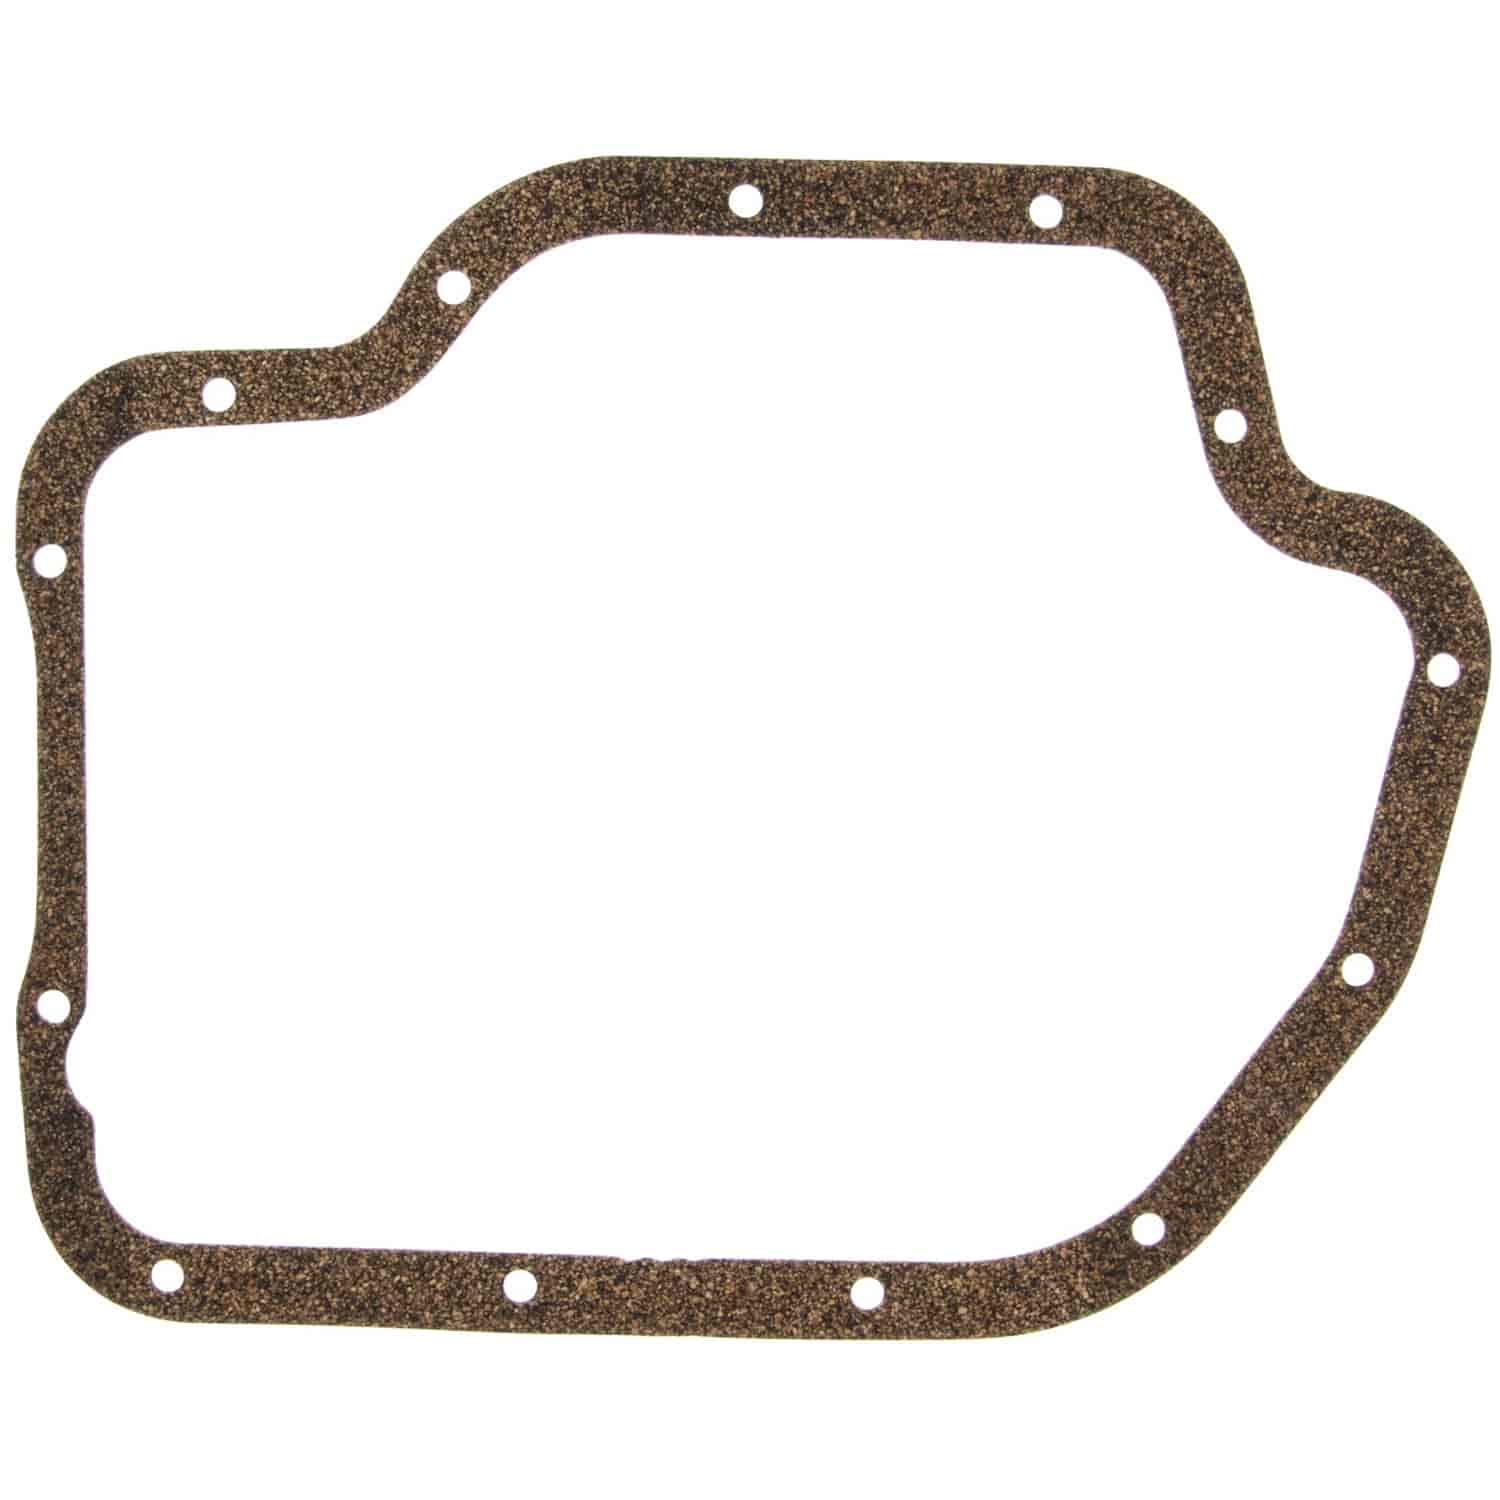 Automatic Transmission Gasket 1964-1993 GM TH400 (3L80) in Cork-Rubber